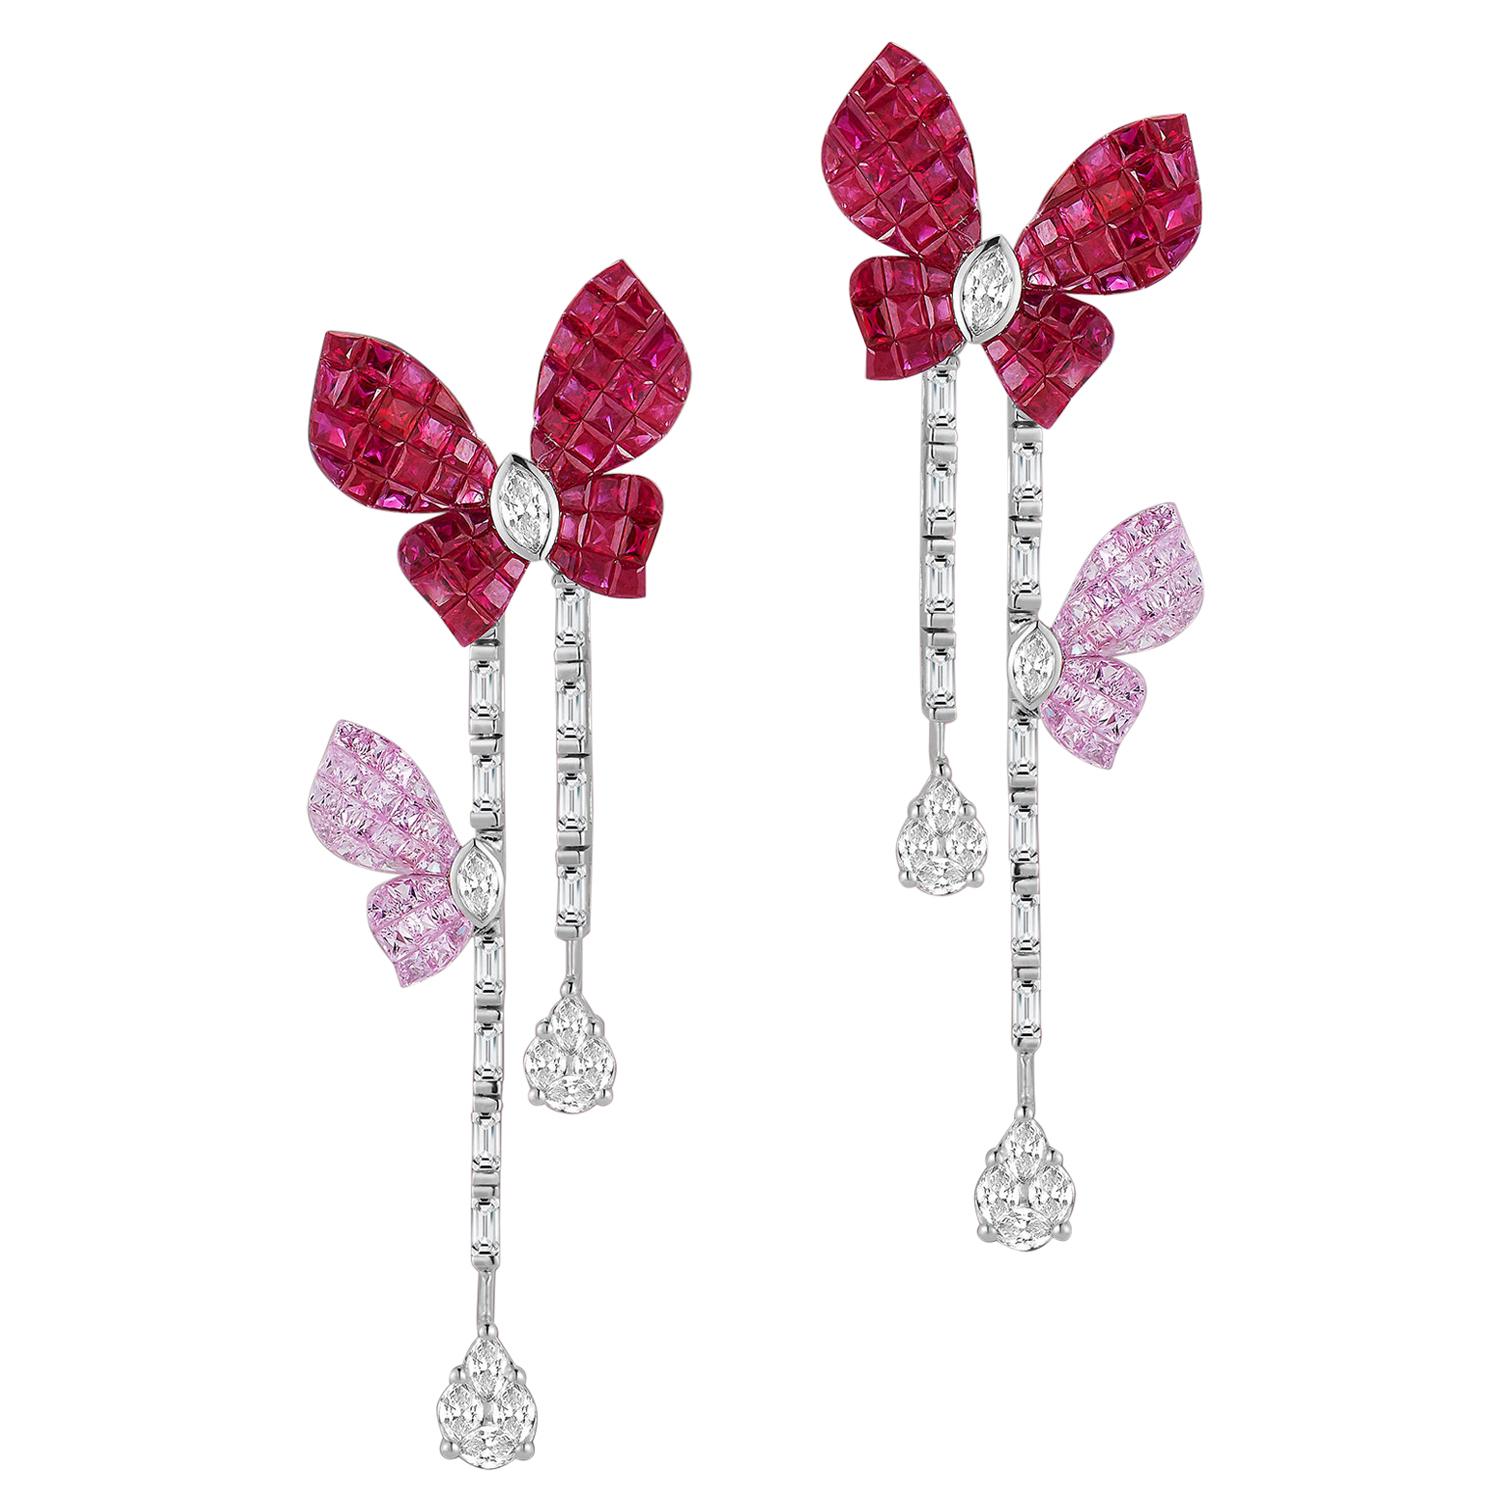 18 Karat Gold Hanging Butterfly Earrings with Diamonds, Rubies and Sapphires